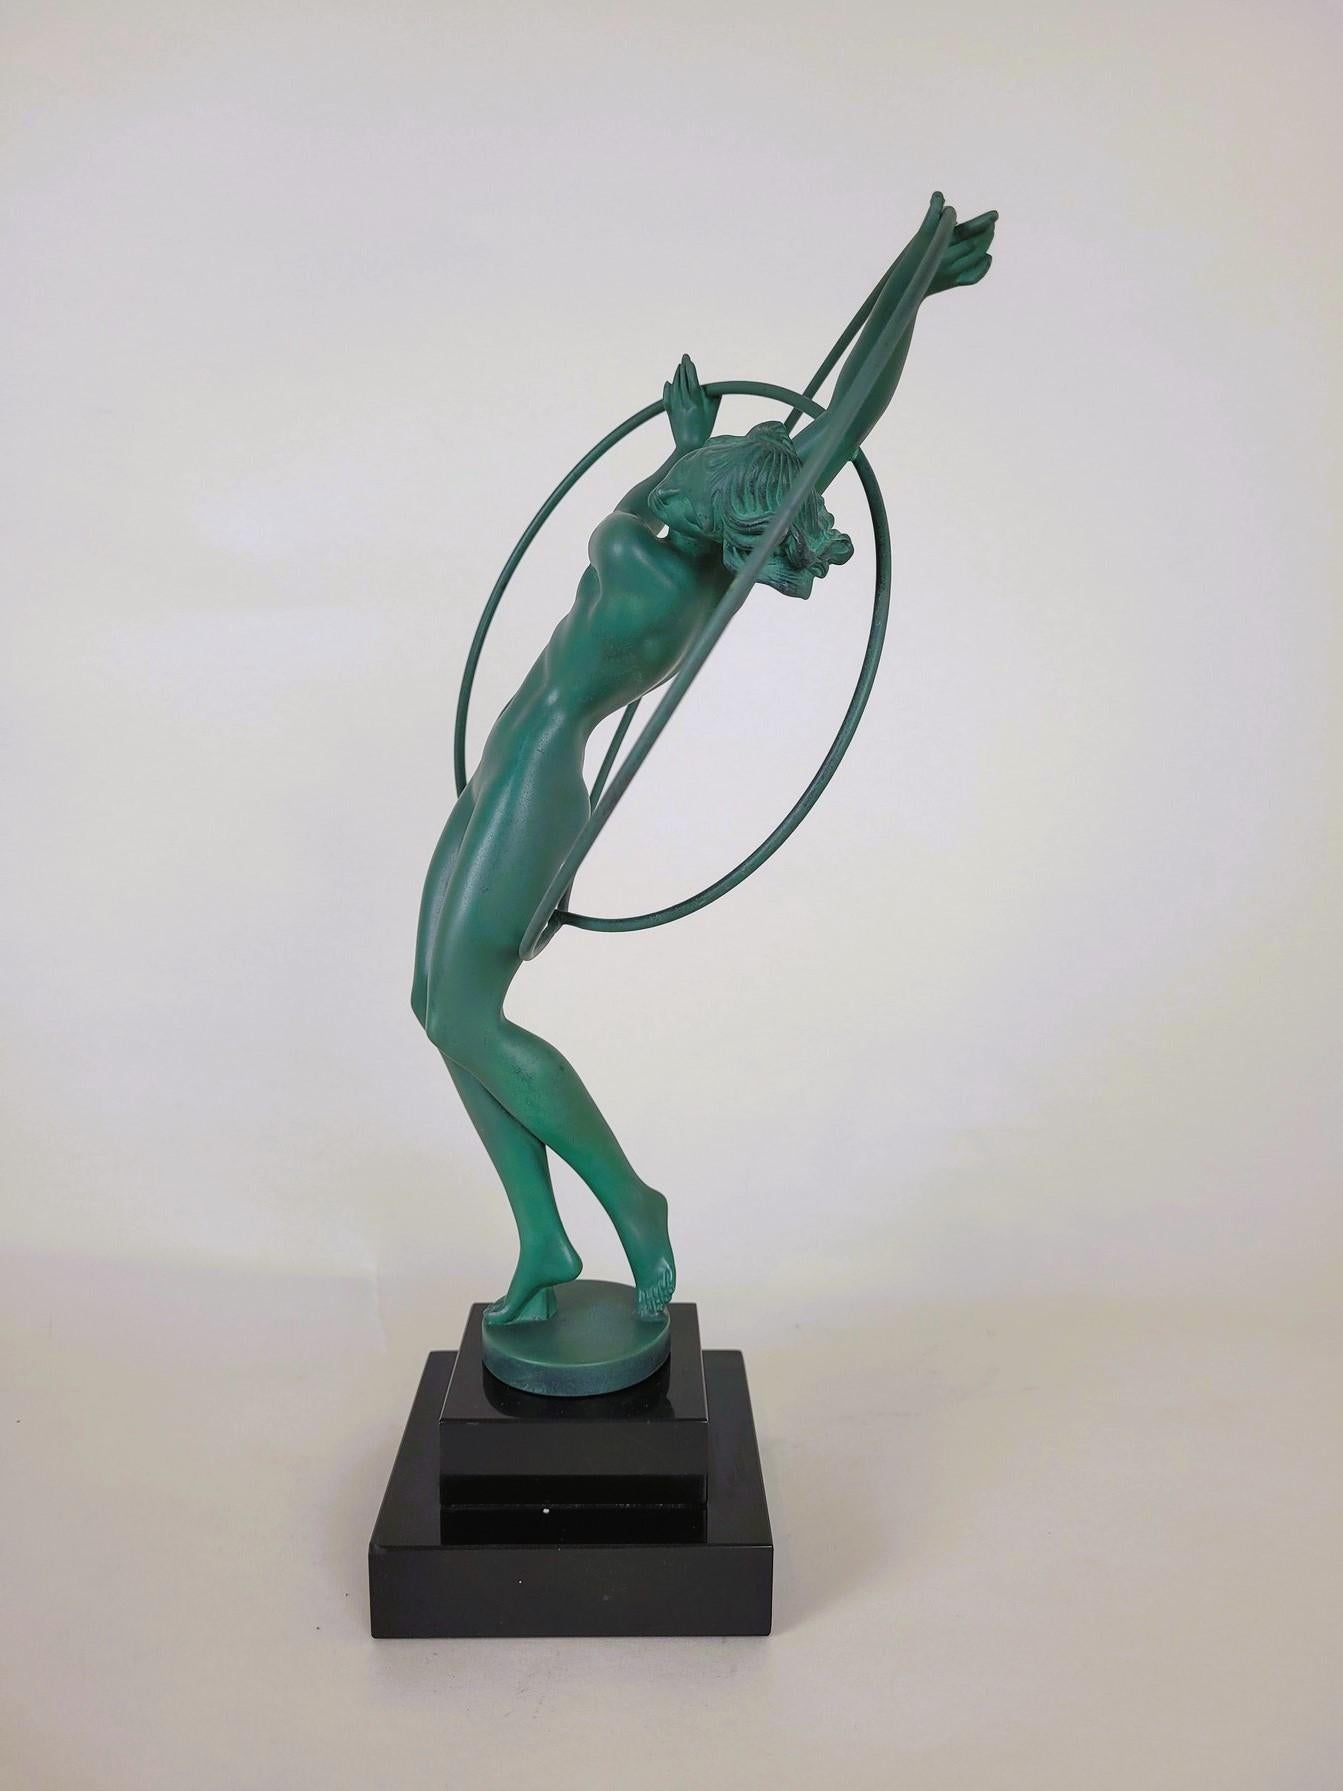 Illusion: Sculpture representing a naked dancer, playing with 2 hoops, standing on a stepped base in black marble

Green patina spelter, the base is signed by Fayral (pseudonym used by Pierre Le Faguays to sign his spelter creations) and published